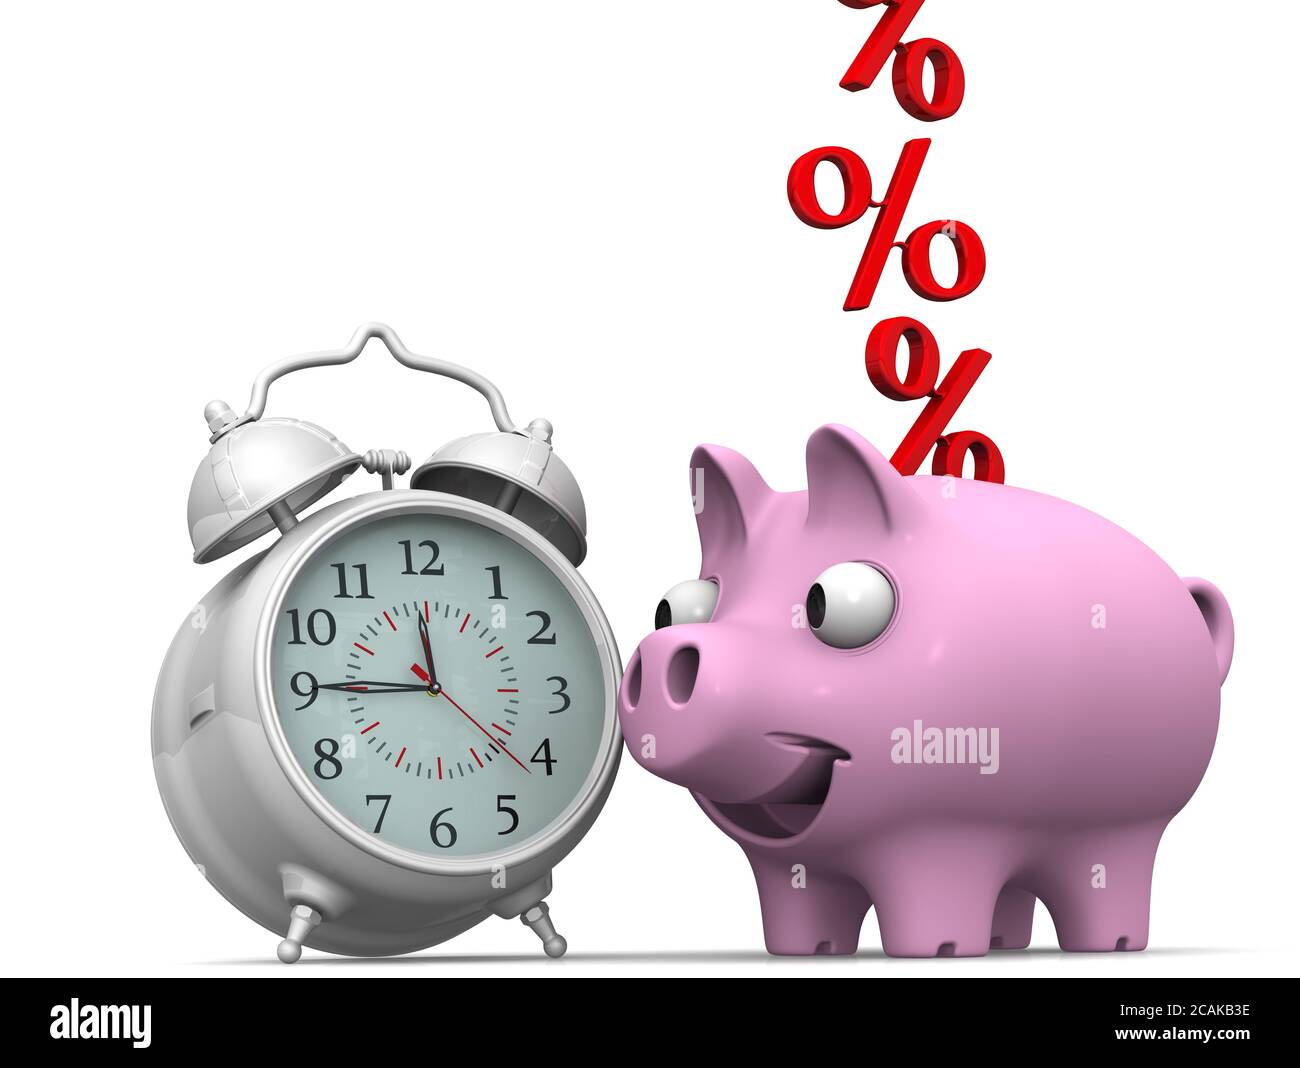 Time and dividends. Alarm clock and piggy bank with a red percentages symbols on a white surface. Financial concept. 3D illustration Stock Photo